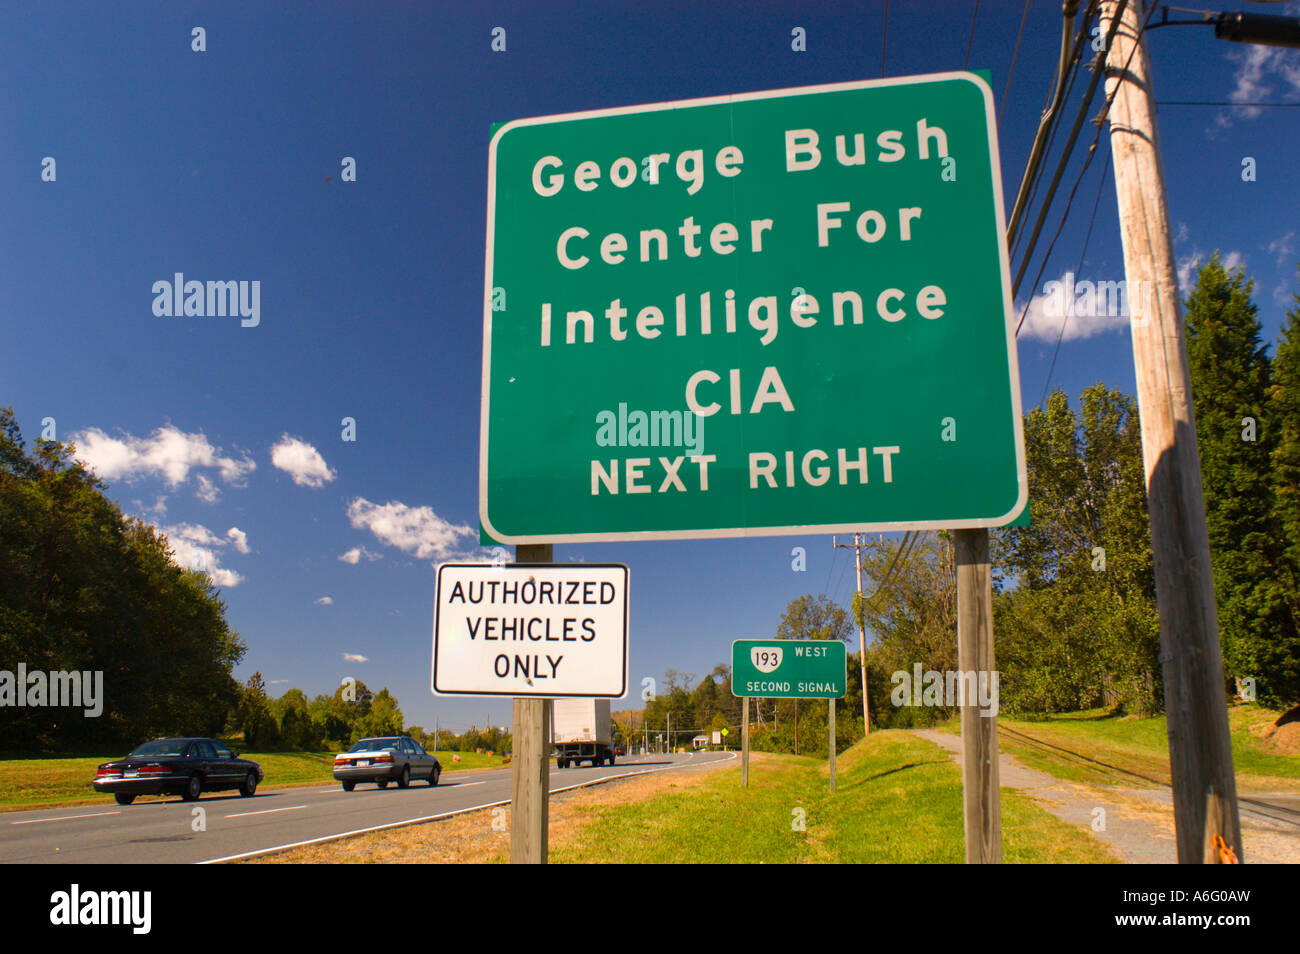 mclean-virginia-usa-road-sign-for-cia-george-bush-center-for-intelligence-A6G0AW.jpg